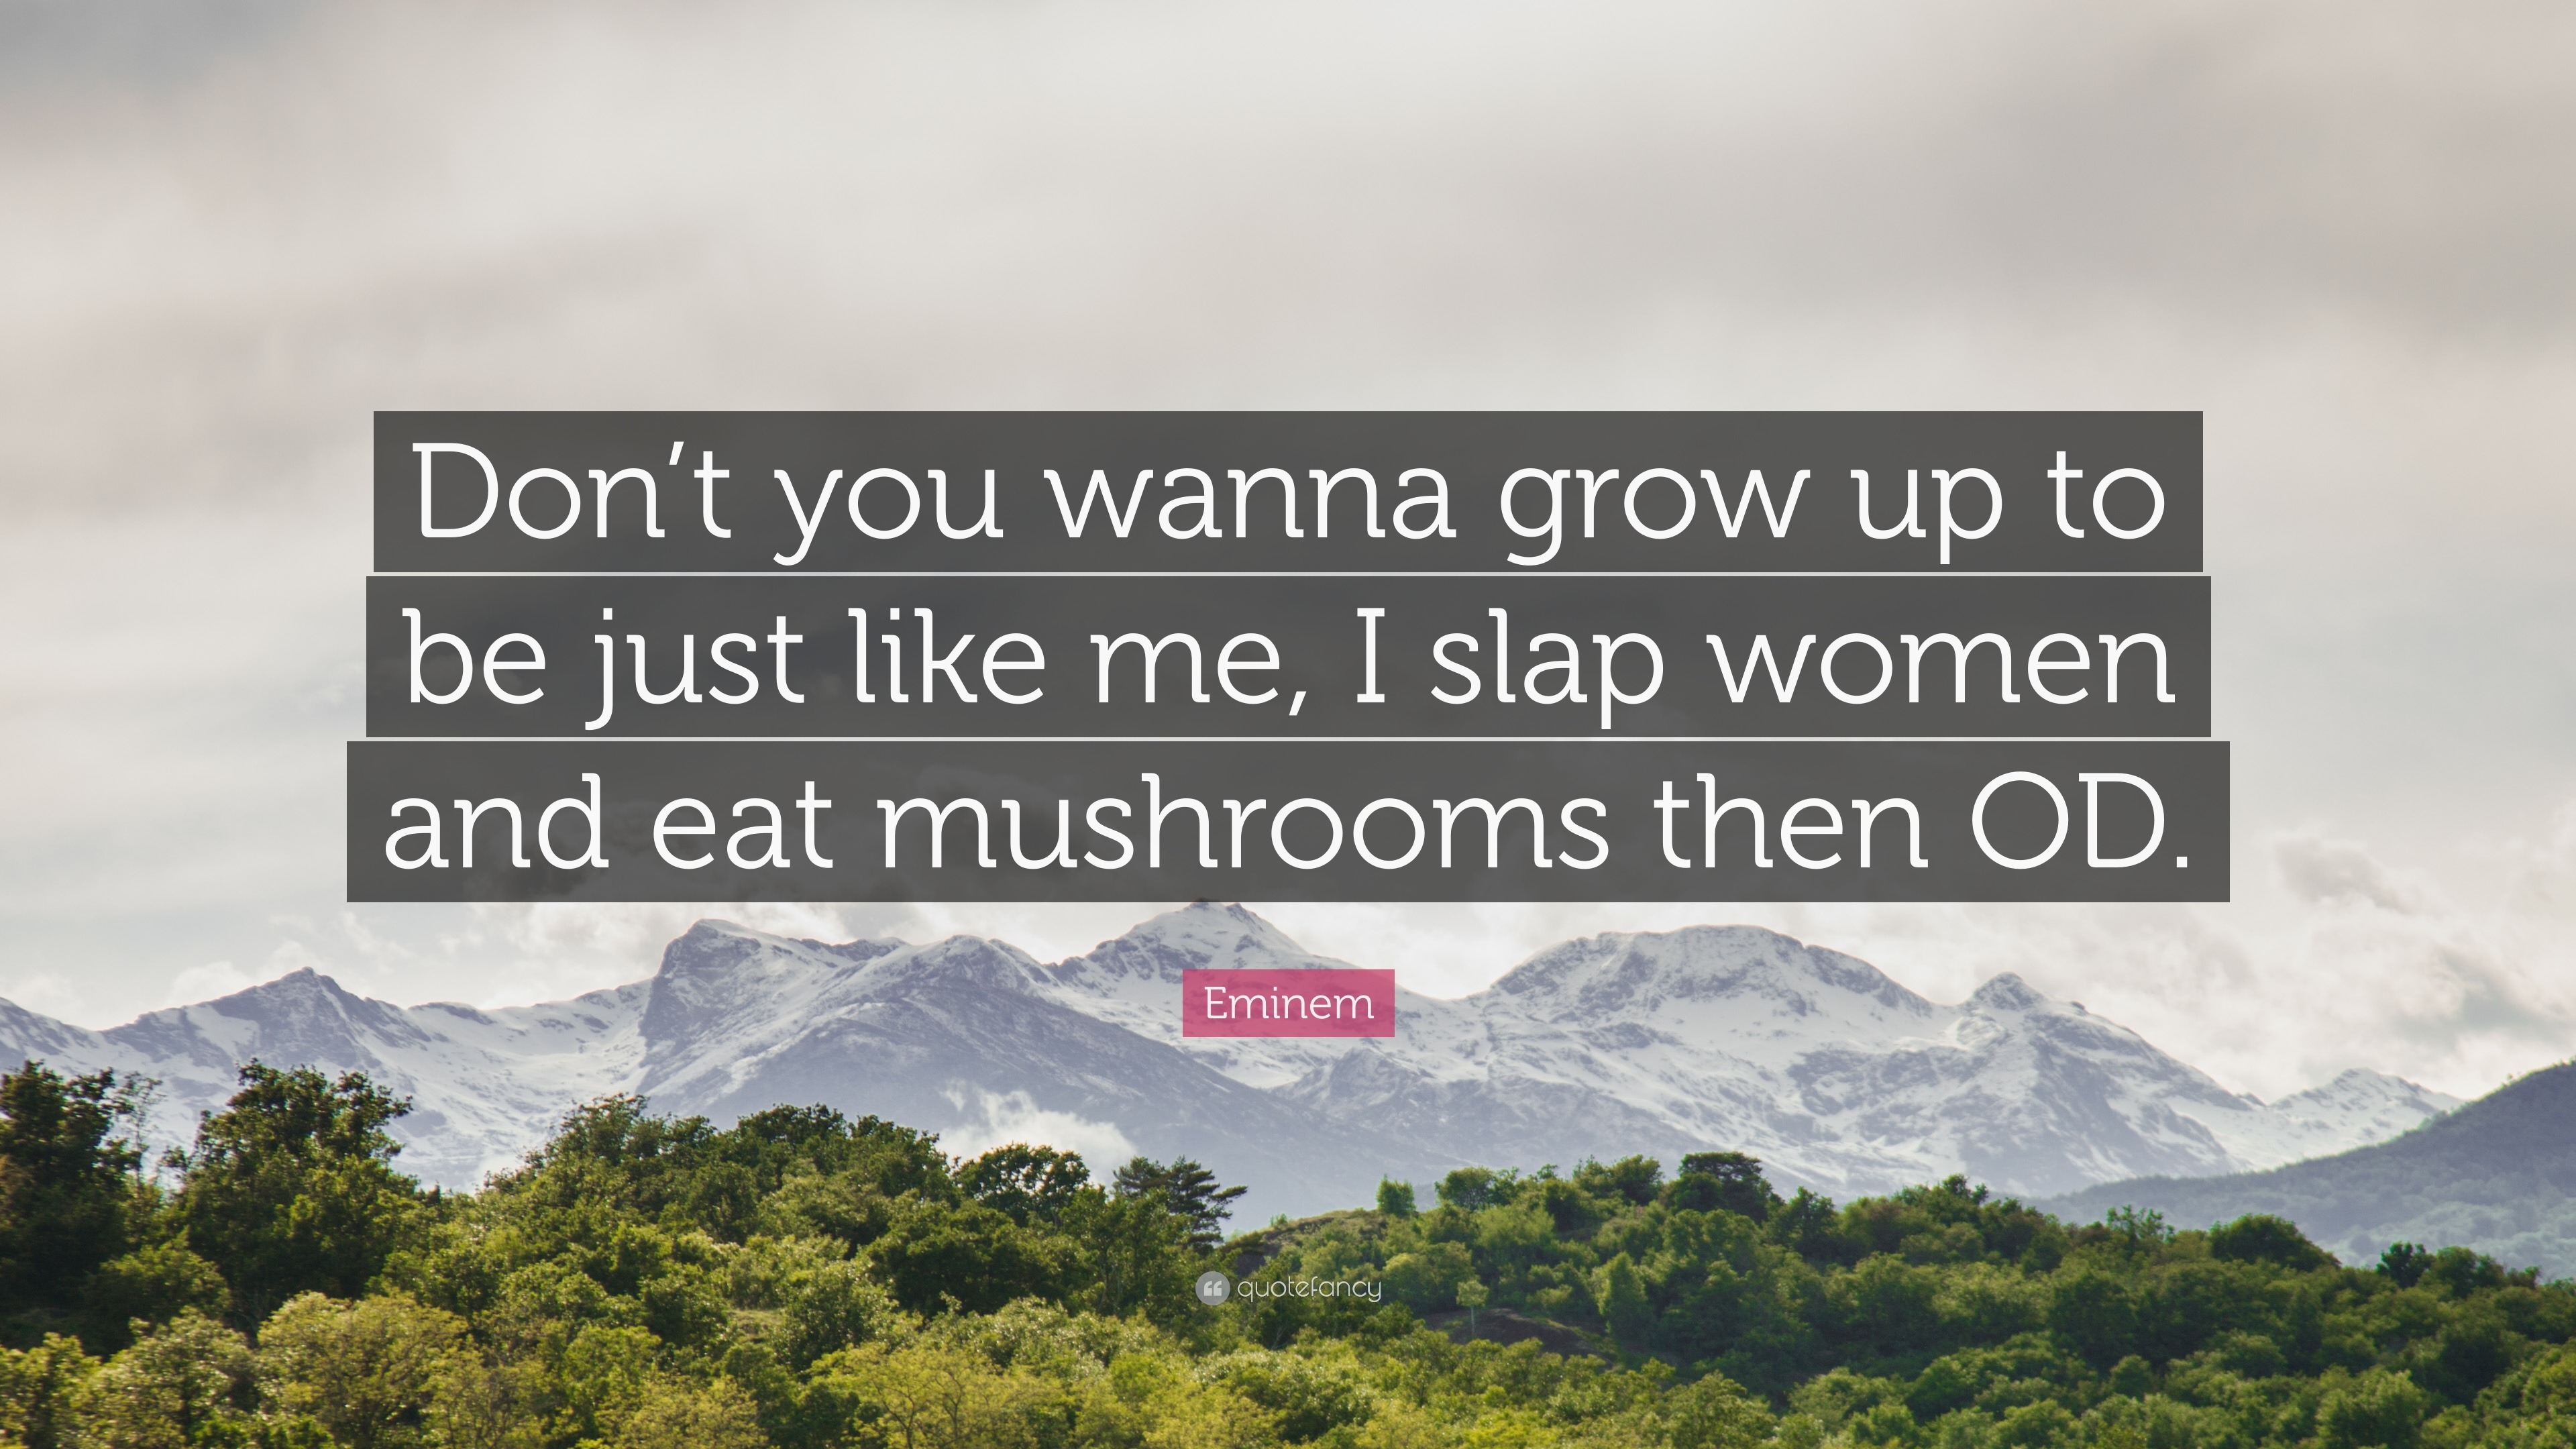 Eminem Quote “Don t you wanna grow up to be just like me